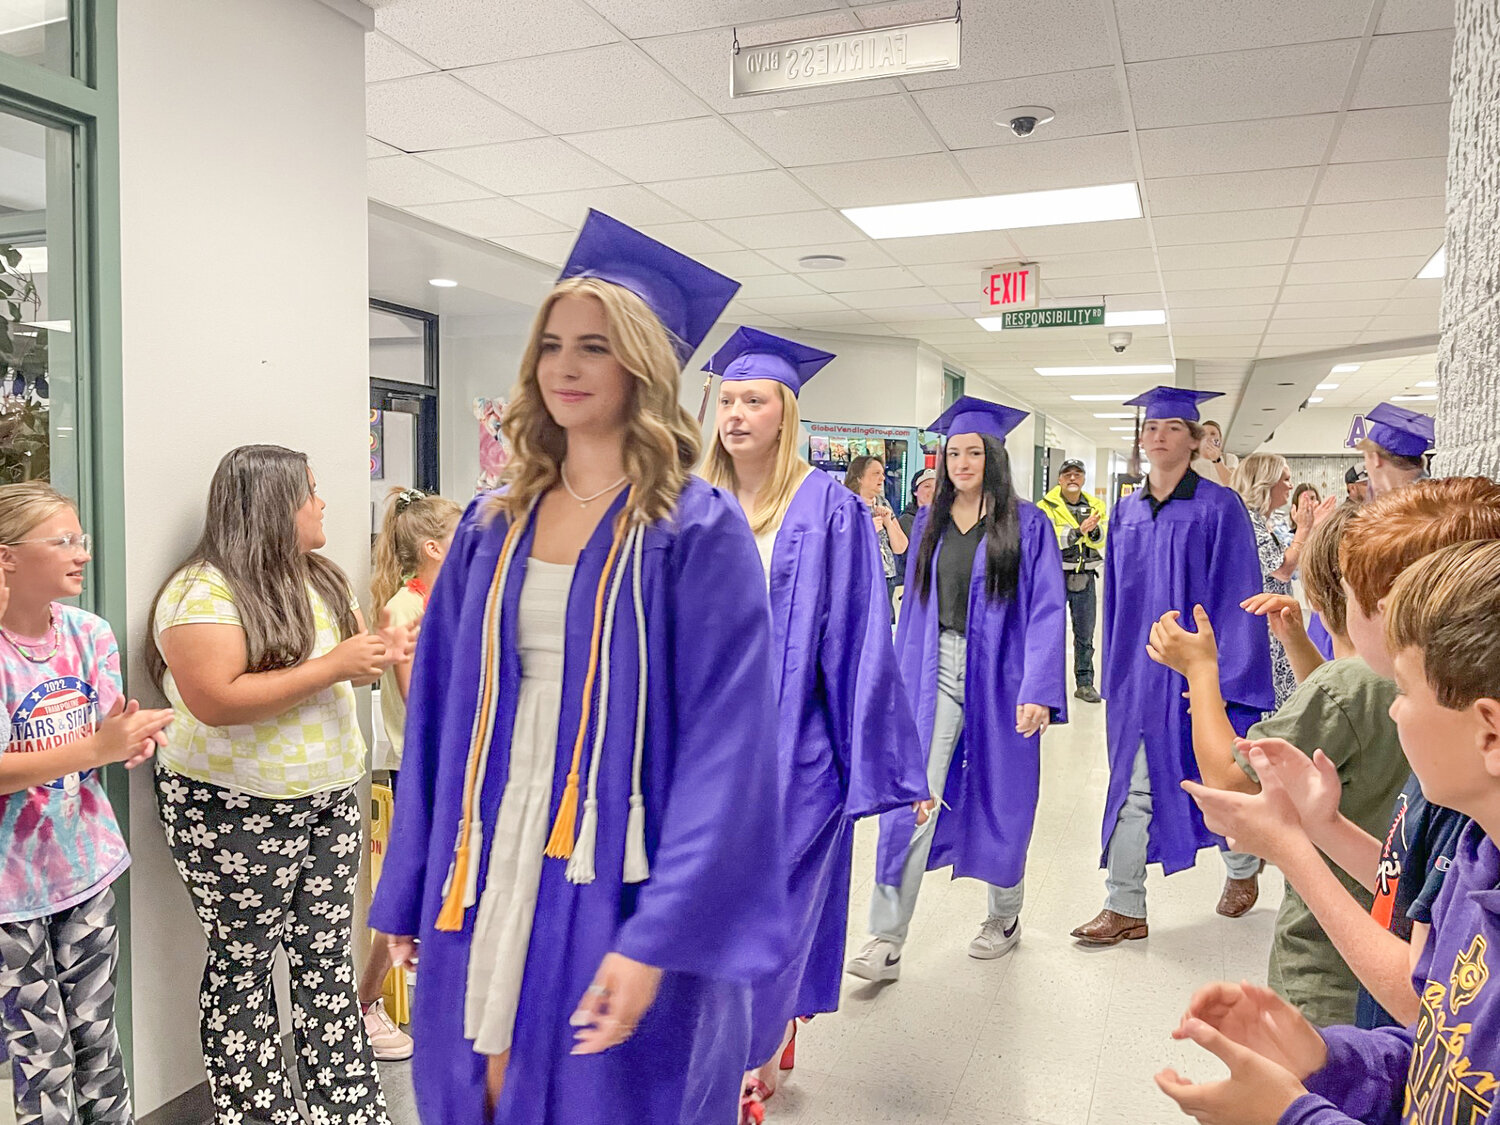 It was a bittersweet moment for Acton Elementary School on May 23, when the traditional Granbury High School Senior Walk was held only minutes before its annual kindergarten graduation ceremony. 